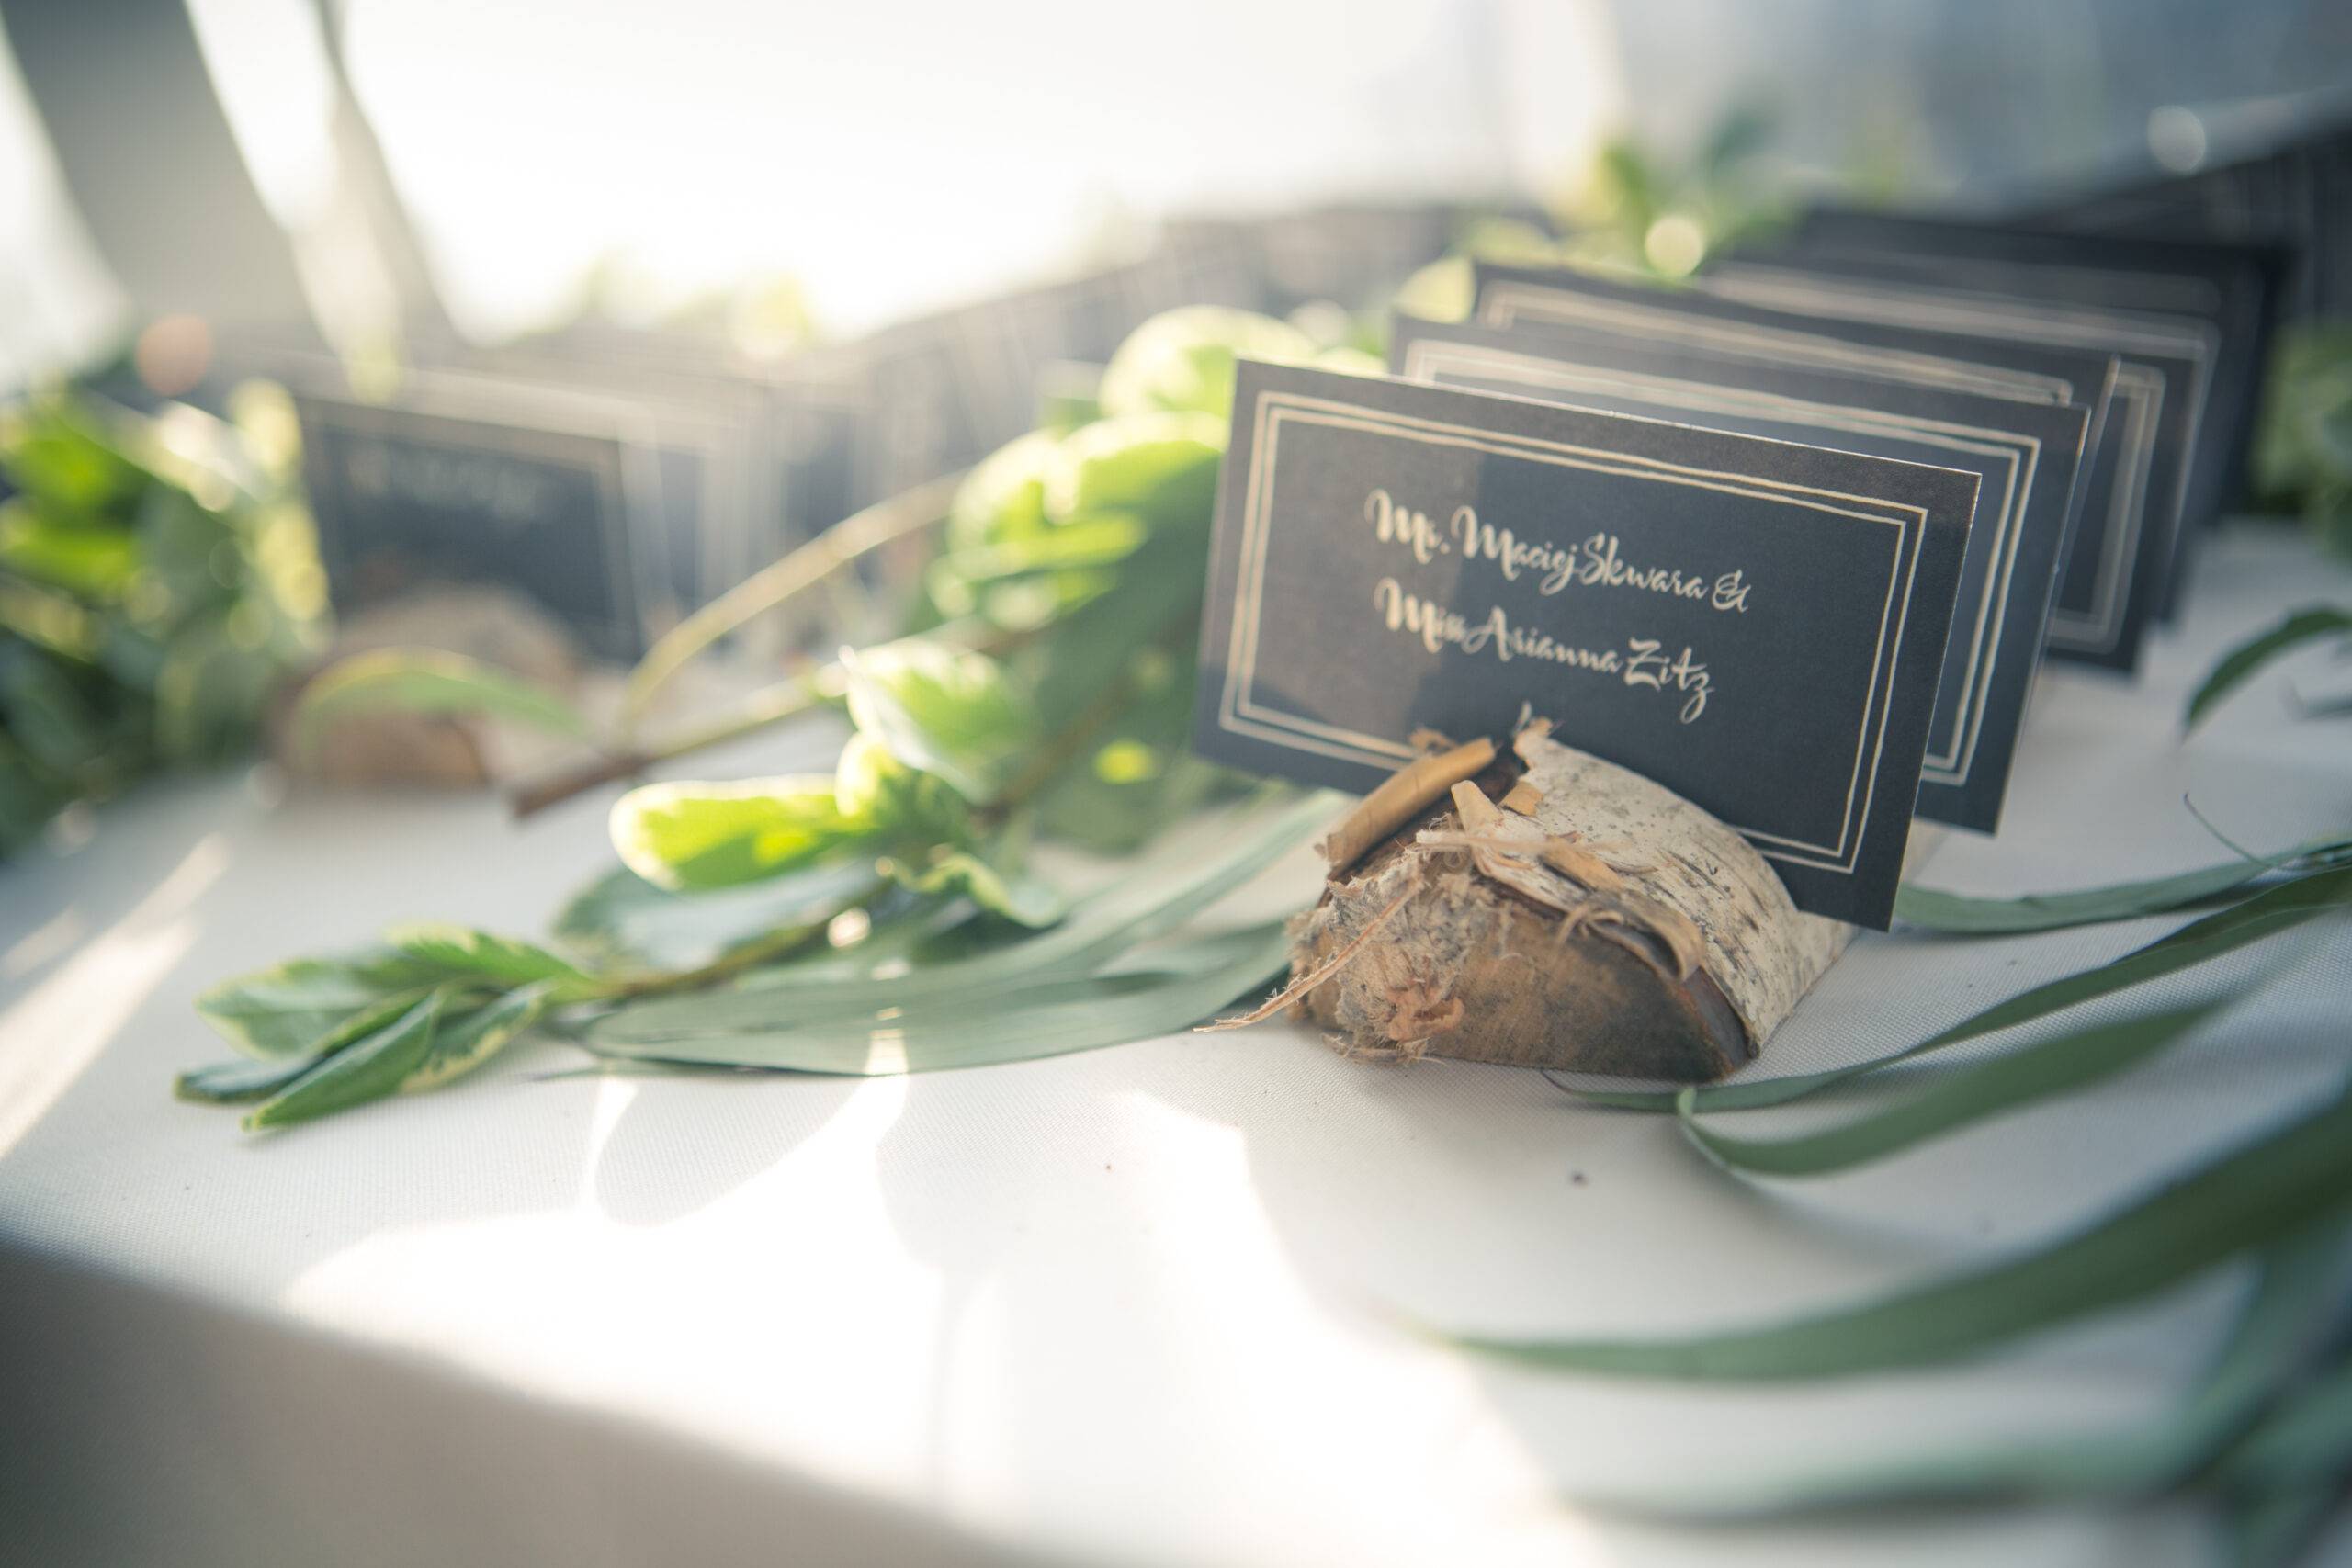 Pine tree placecard holders with black cards listing guest names